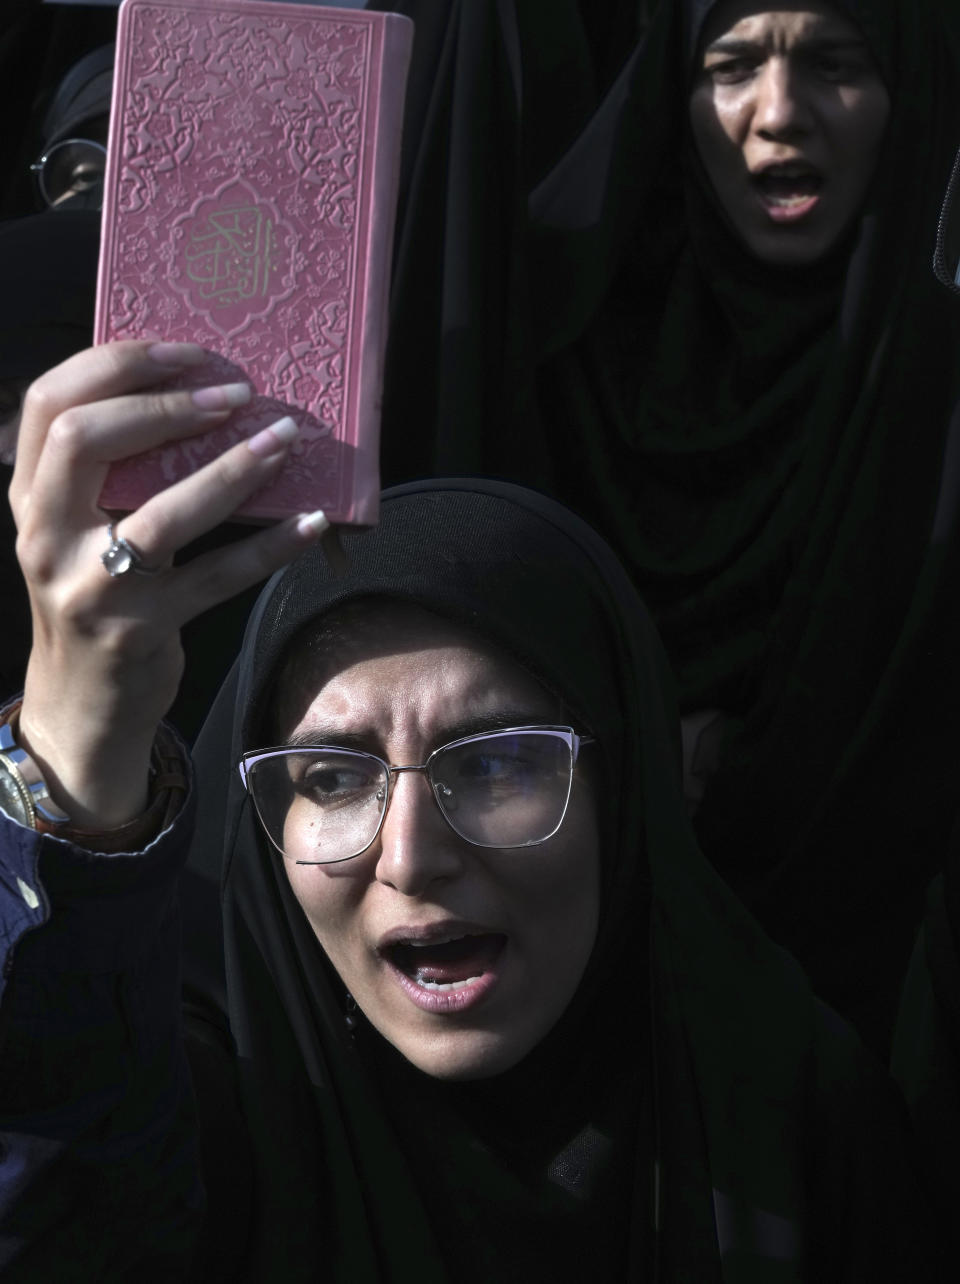 A protester holds up a copy of Muslim's holy book, the Quran, in a protest against Sweden in front of the Swedish Embassy in Tehran, Iran, Friday, July 21, 2023. Thousands of people took to the streets in a handful of Muslim-majority countries Friday to express their outrage at the desecration of a copy of the Quran in Sweden, a day after protesters stormed the country's embassy in Iraq. (AP Photo/Vahid Salemi)